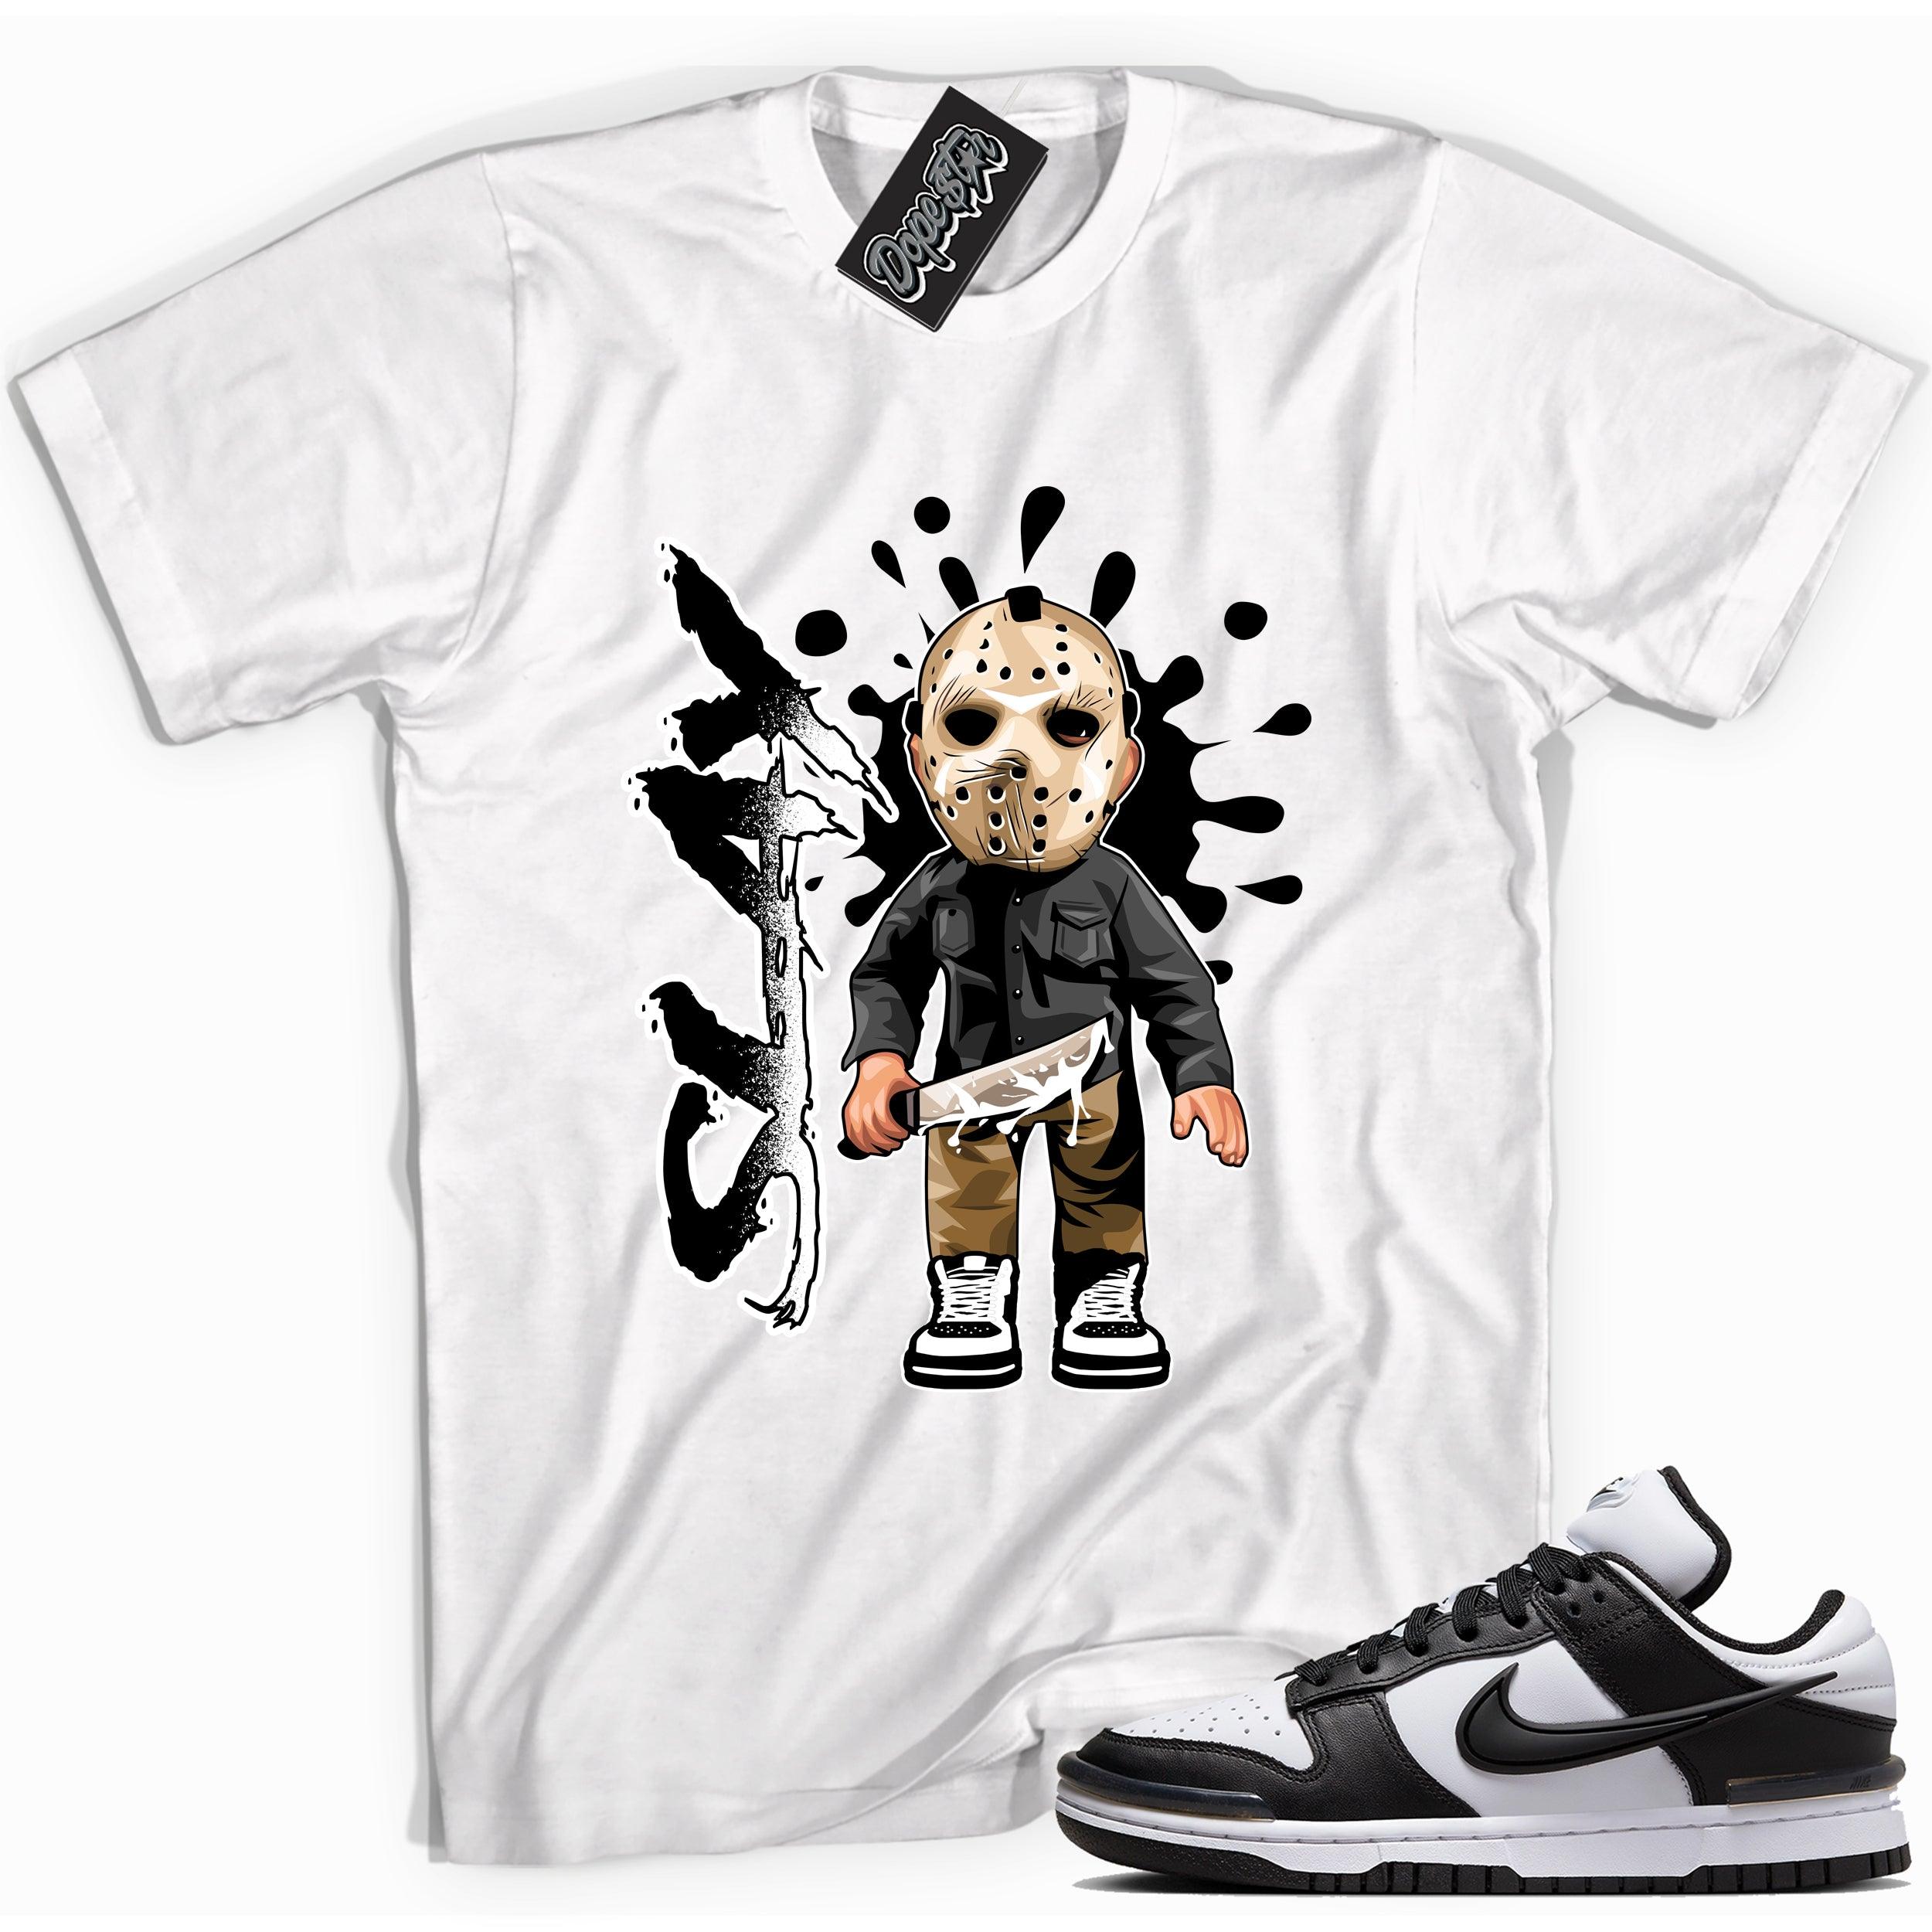 Cool white graphic tee with 'slay' print, that perfectly matches Nike Dunk Low Twist Panda sneakers.